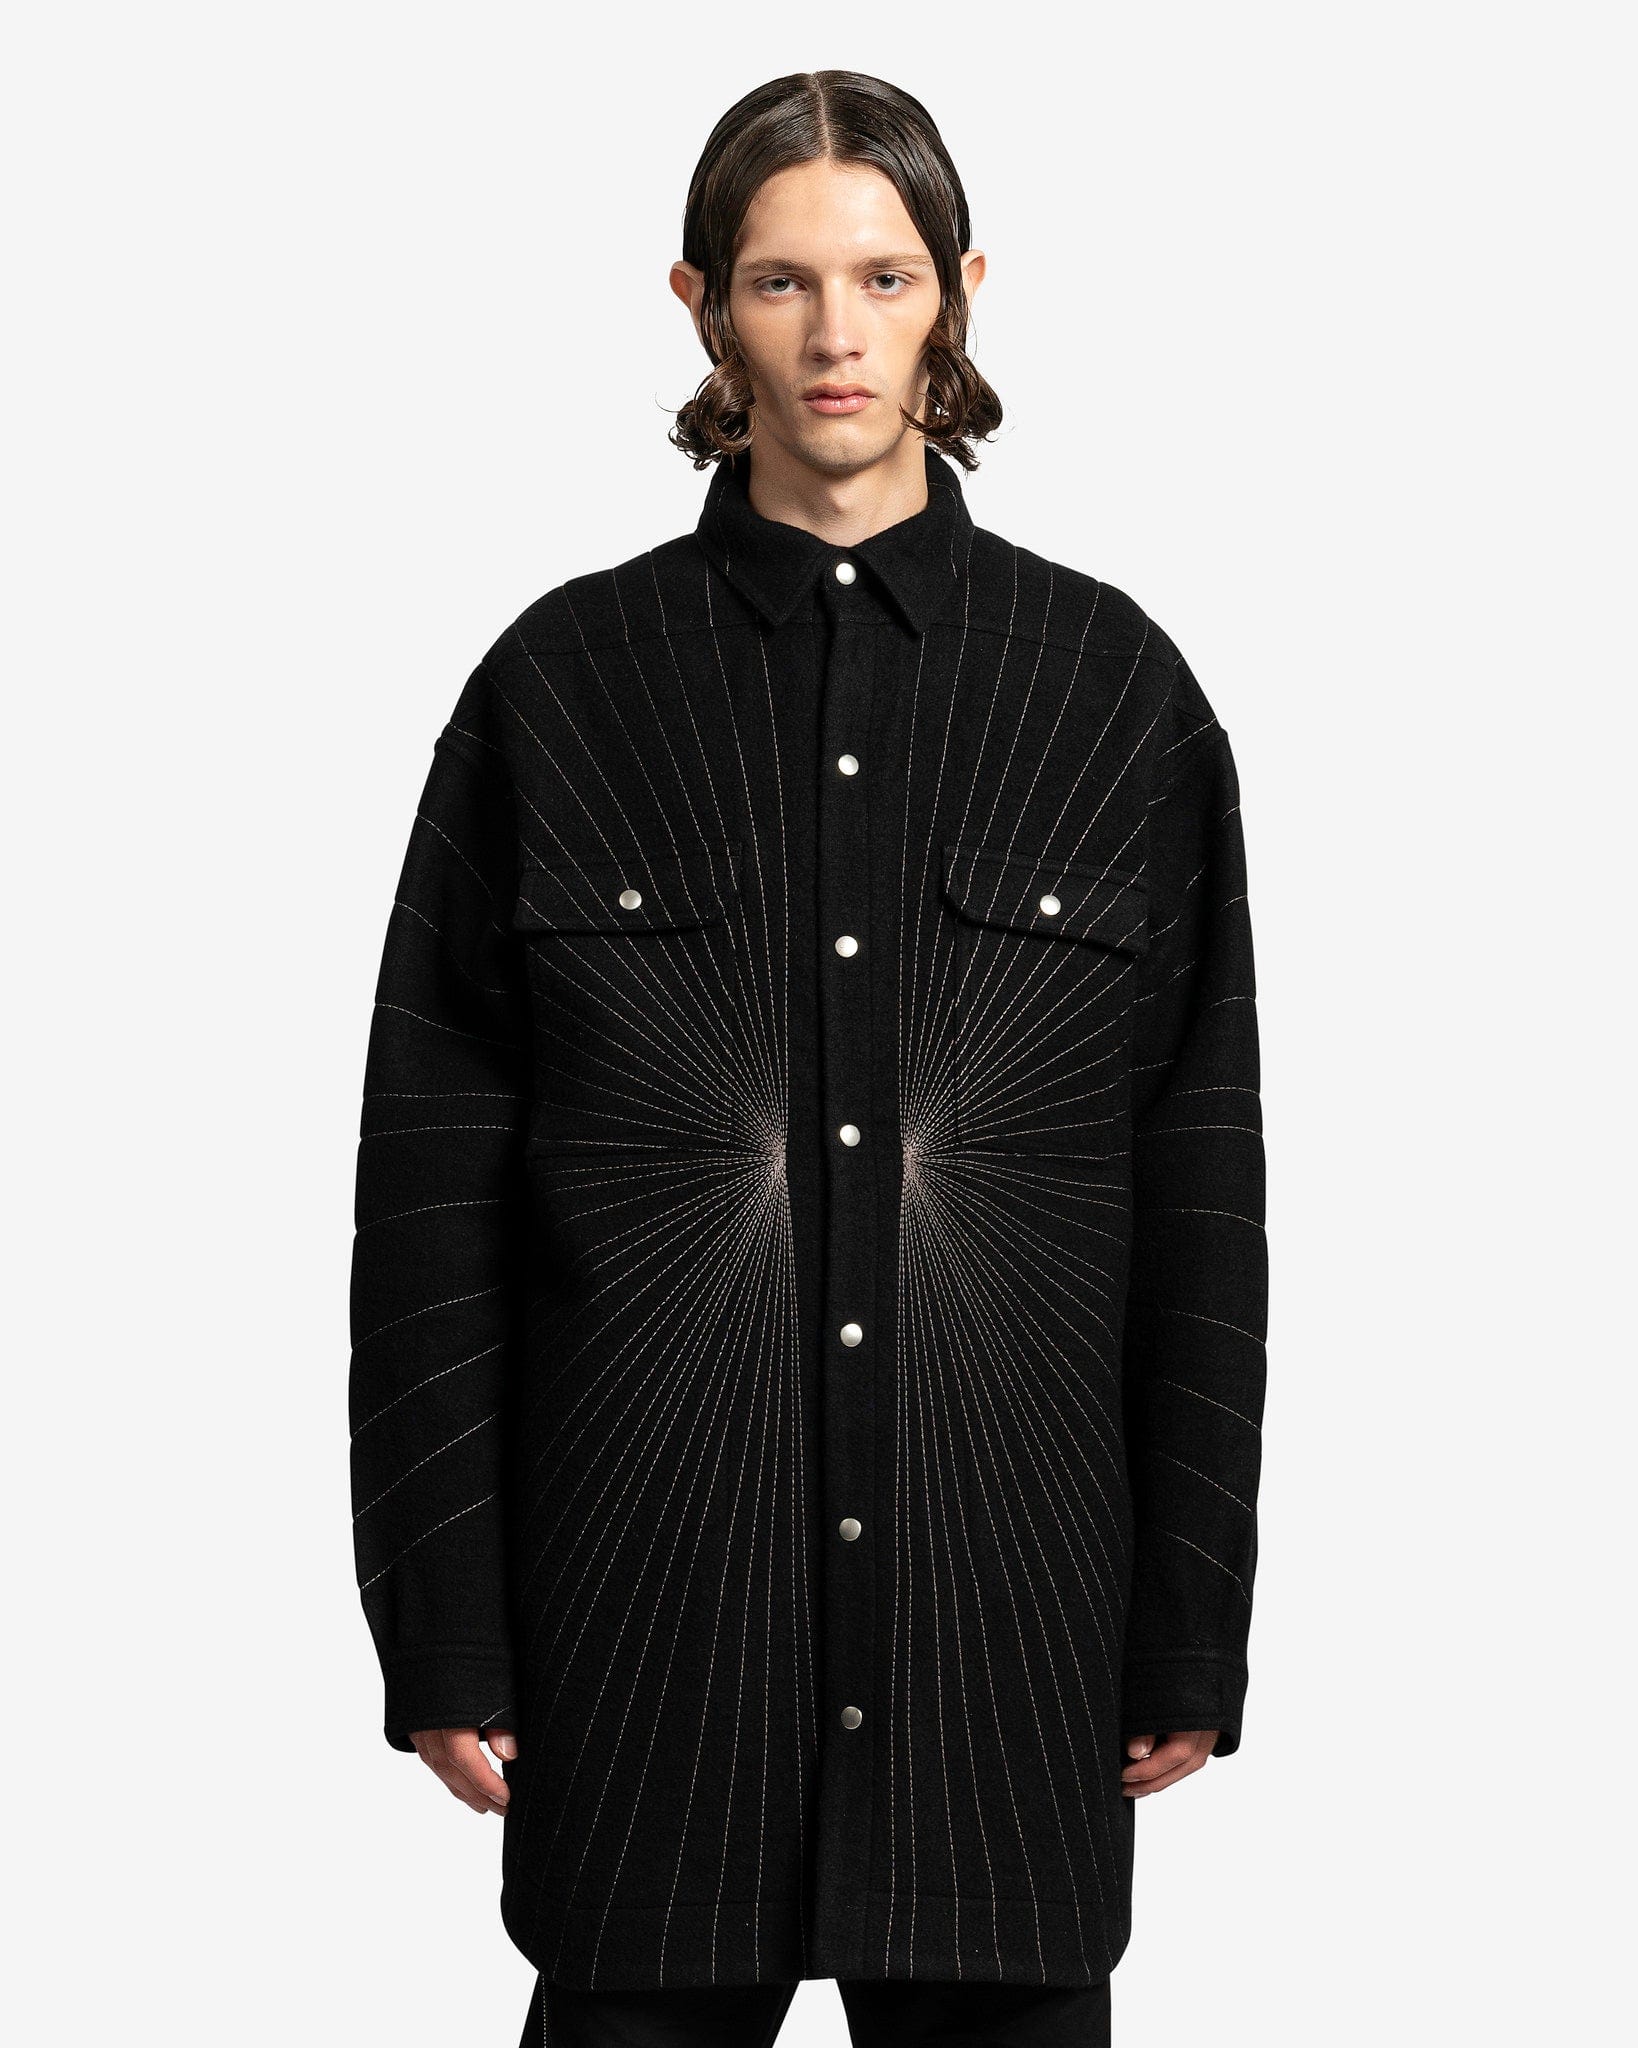 Rick Owens Men's Jackets Oversized Outershirt in Black/Dust